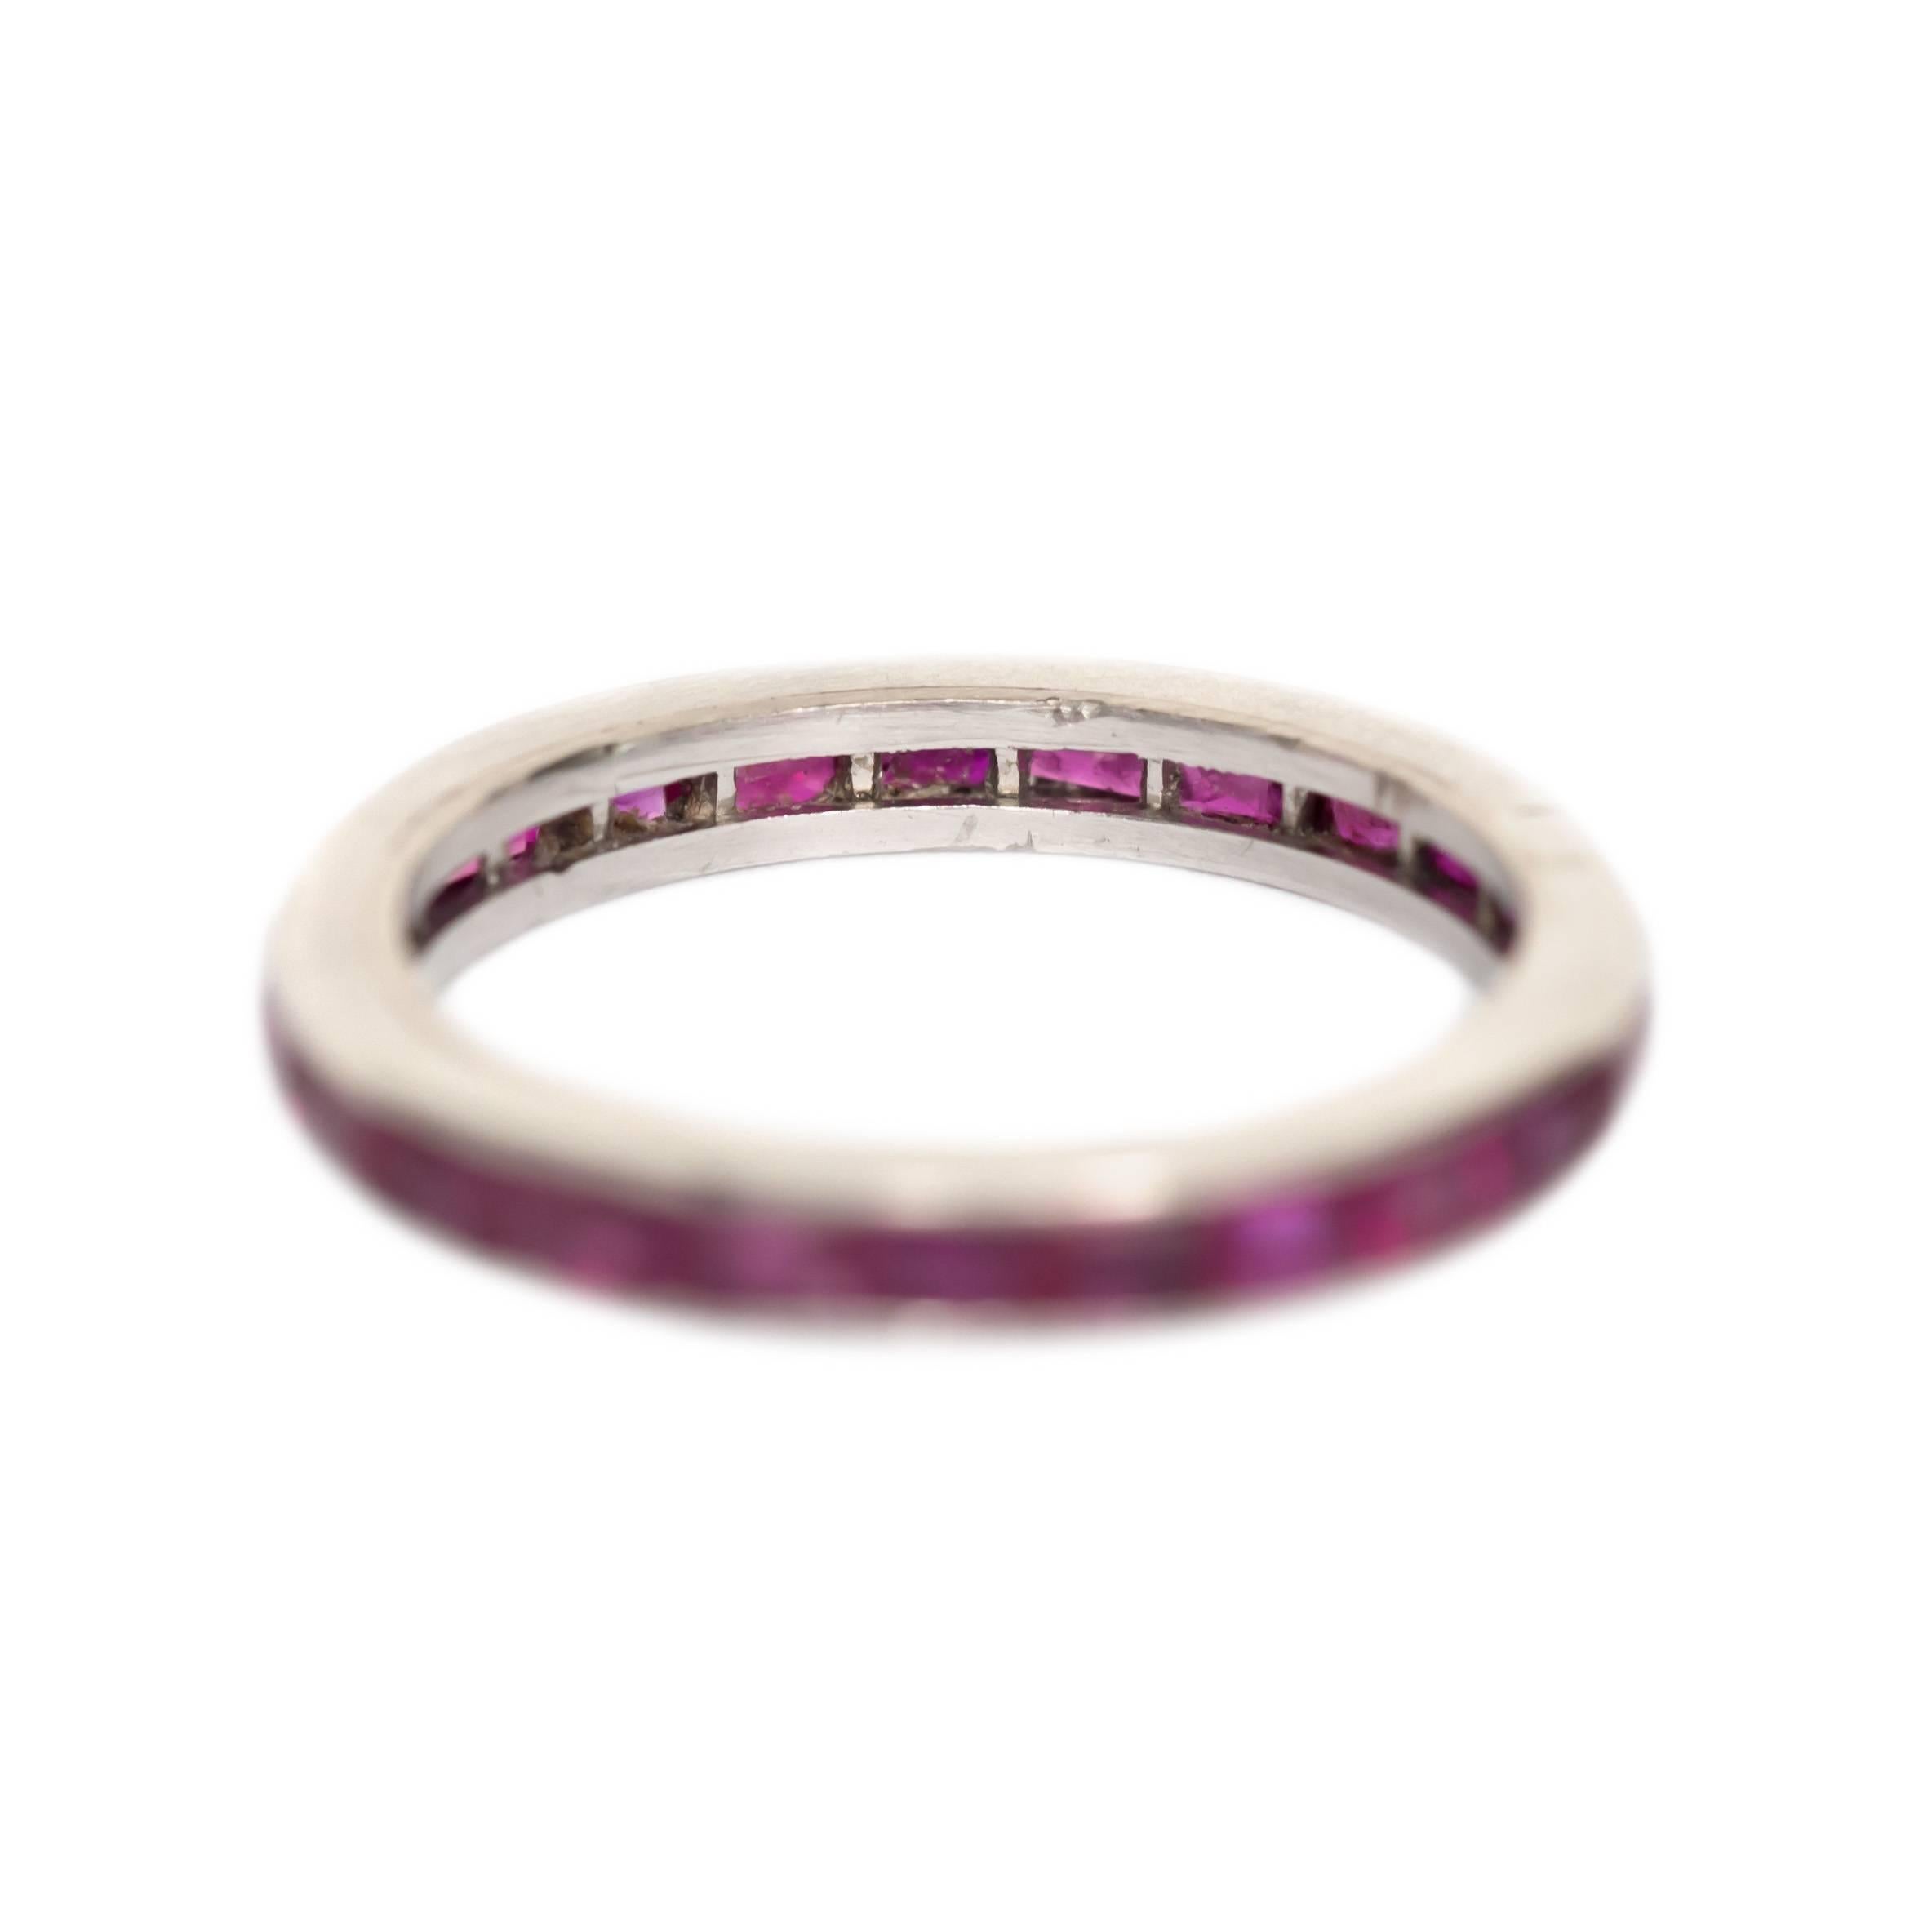 Item Details:
Ring Size: 6
Metal Type: 18 Karat White Gold
Weight: 3.0 grams

Color Stone Details: 
Type: Synthetic Ruby
Shape: Princess Cut 
Carat Weight: 1.50 carat, total weight.
Color: Deep Red
Clarity: VS1

Finger to Top of Stone Measurement: